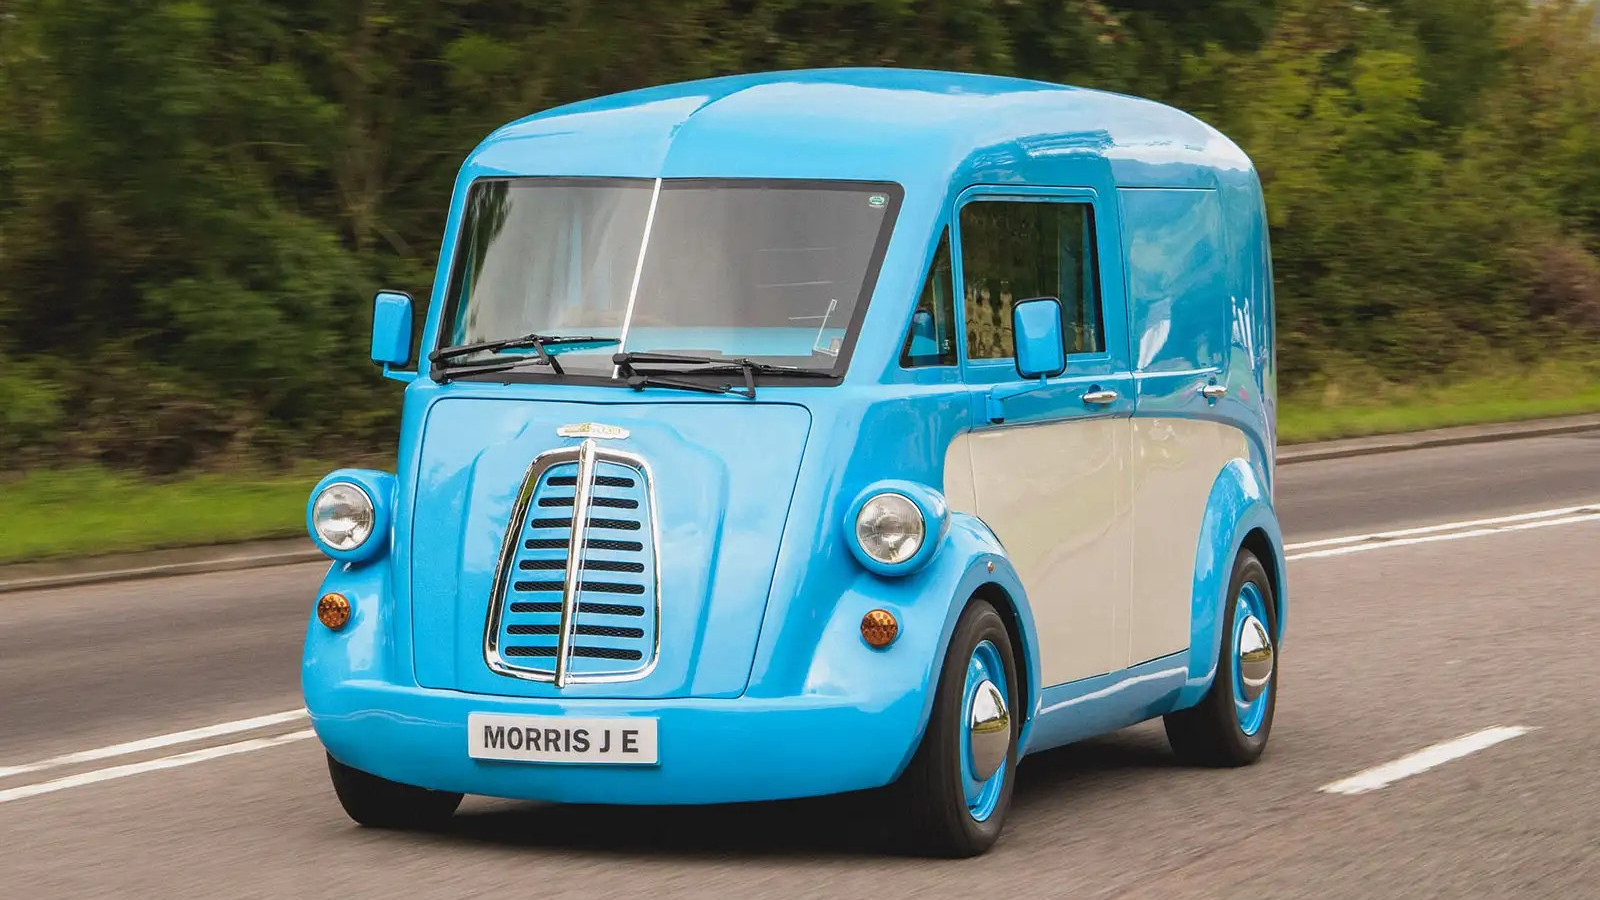 The Electric Vans Inspired By Classic Vehicles